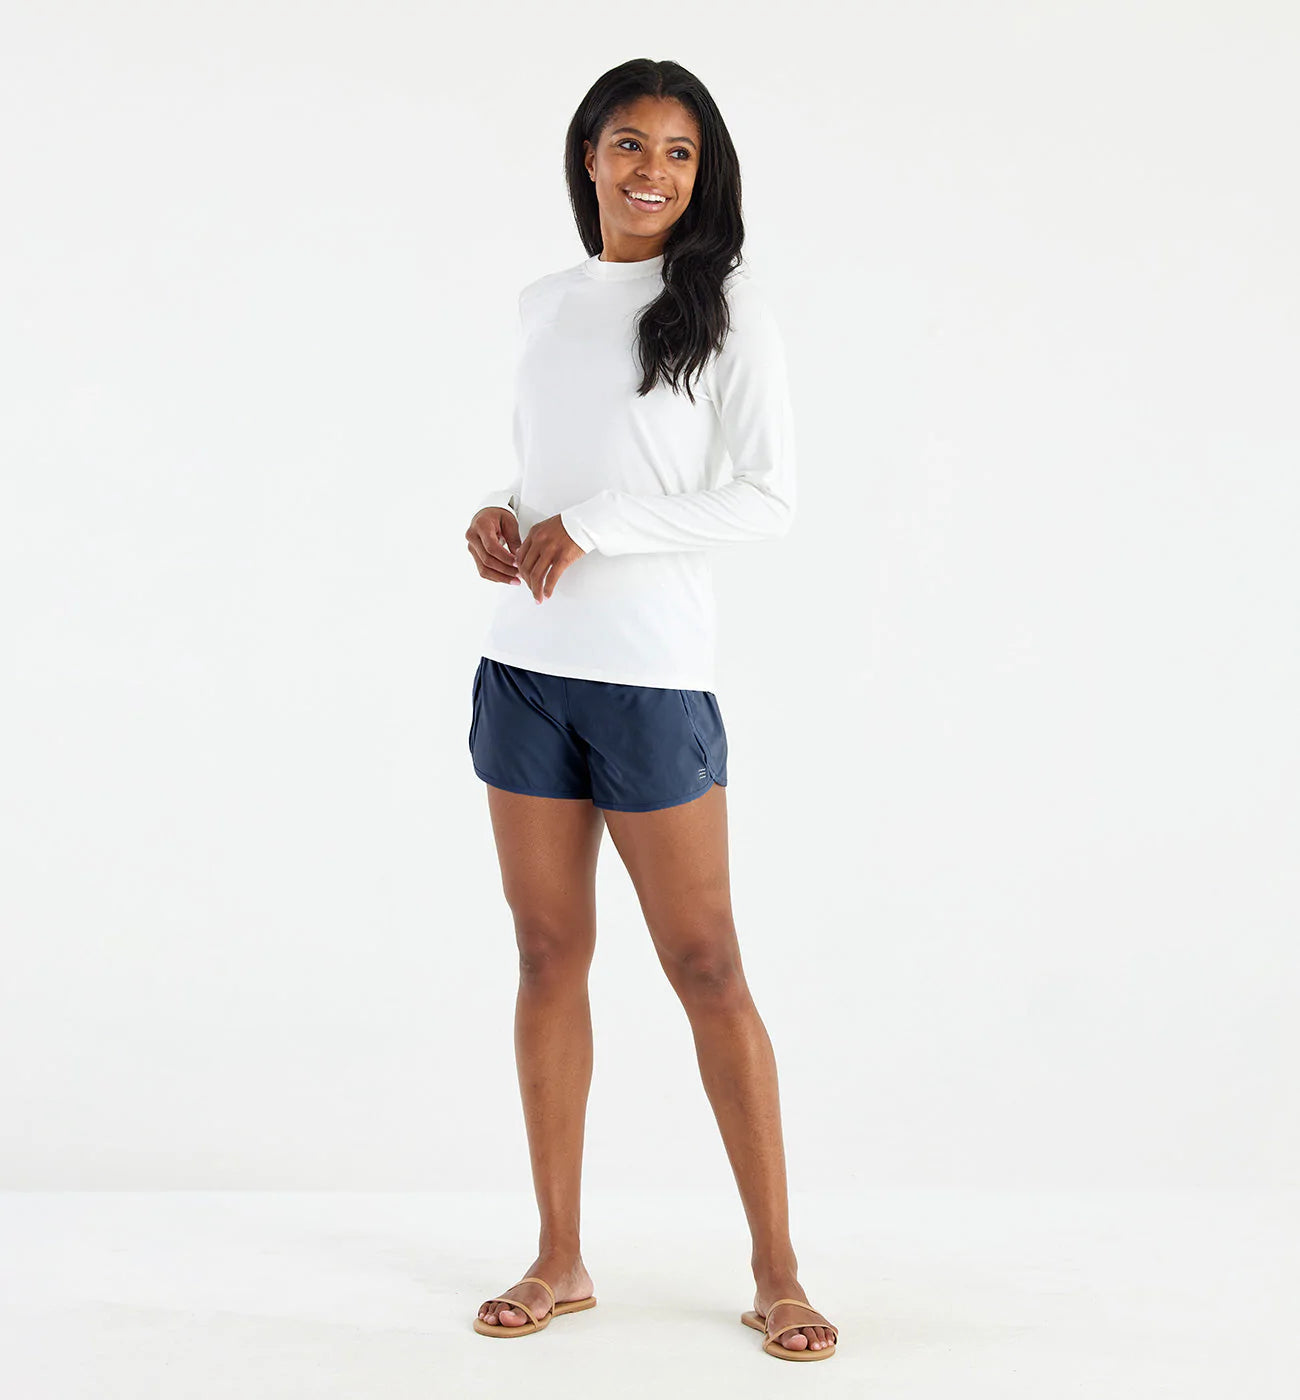 Women's Bamboo Lined Shorts